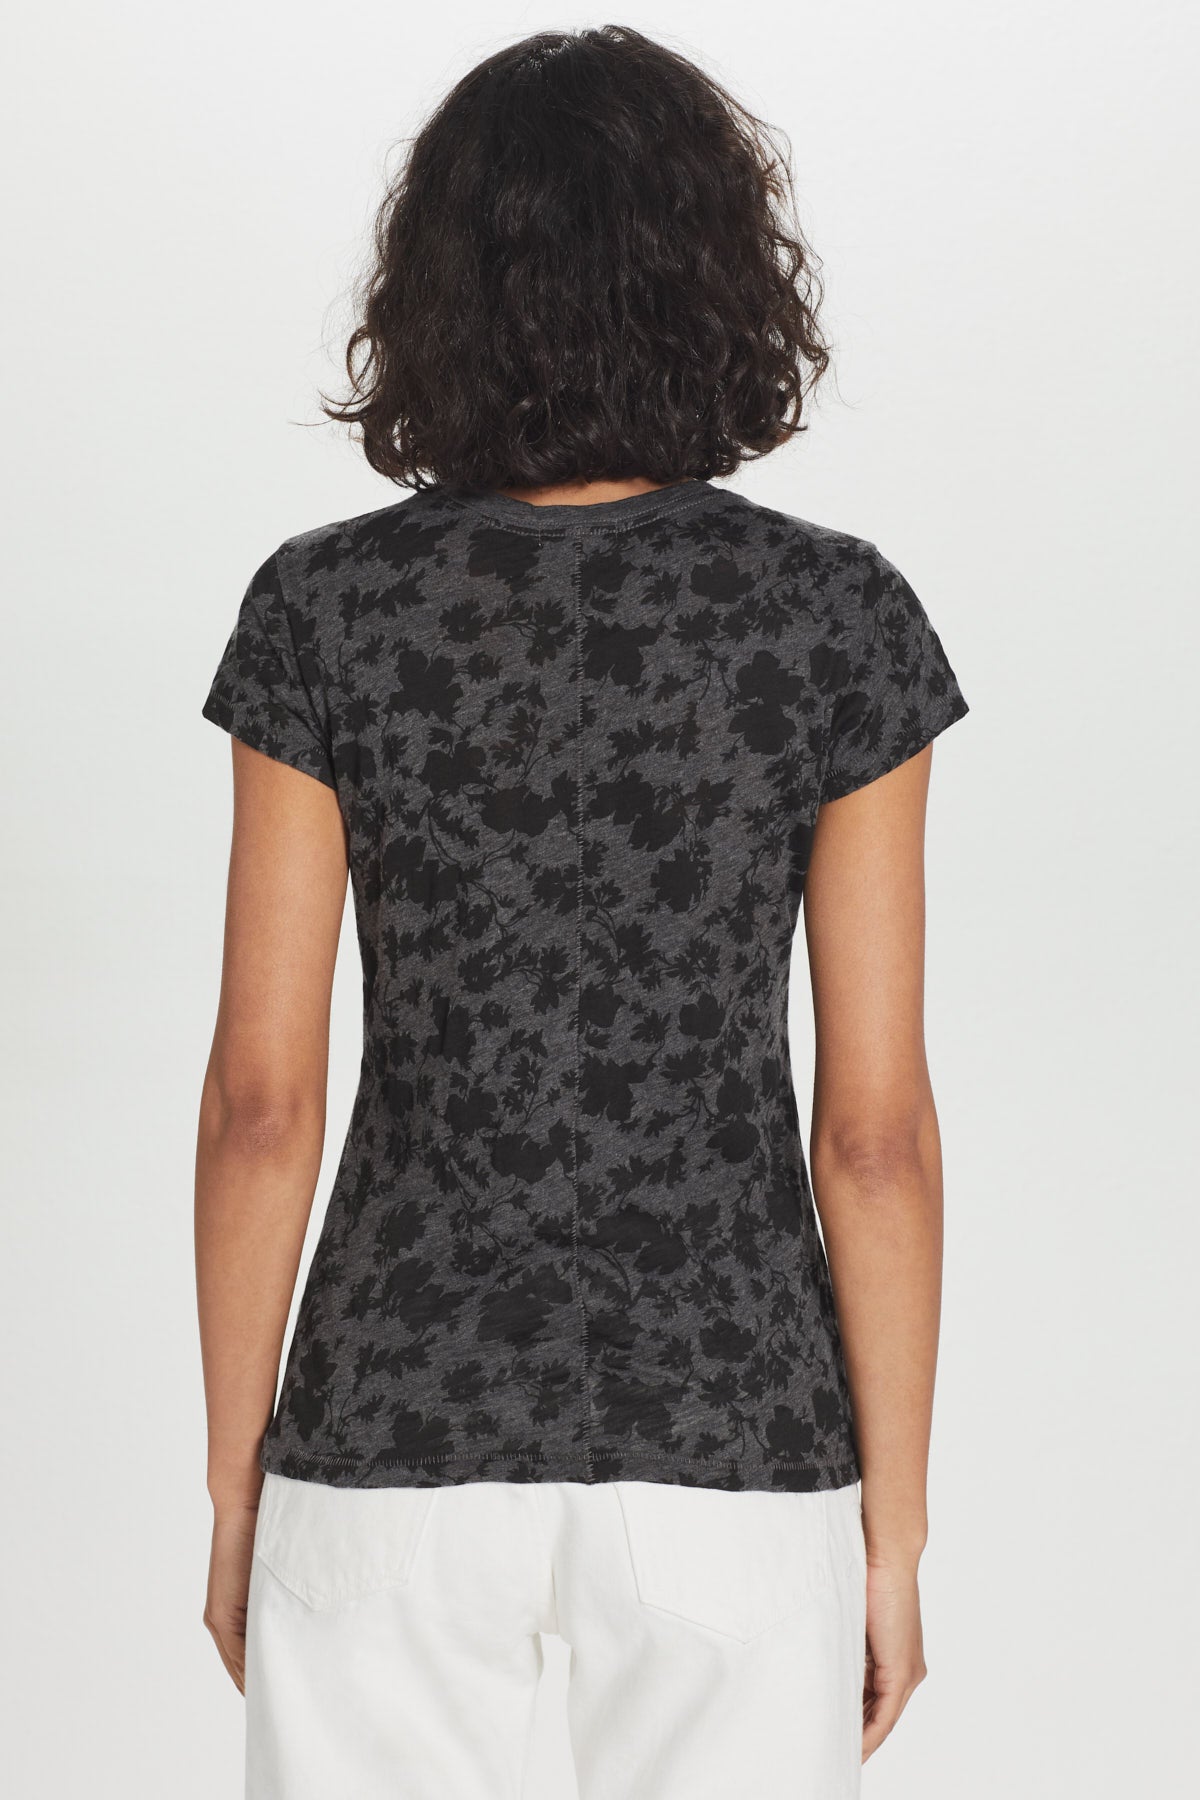 Rococo Floral Ringer Tee - Goldie Lewinter